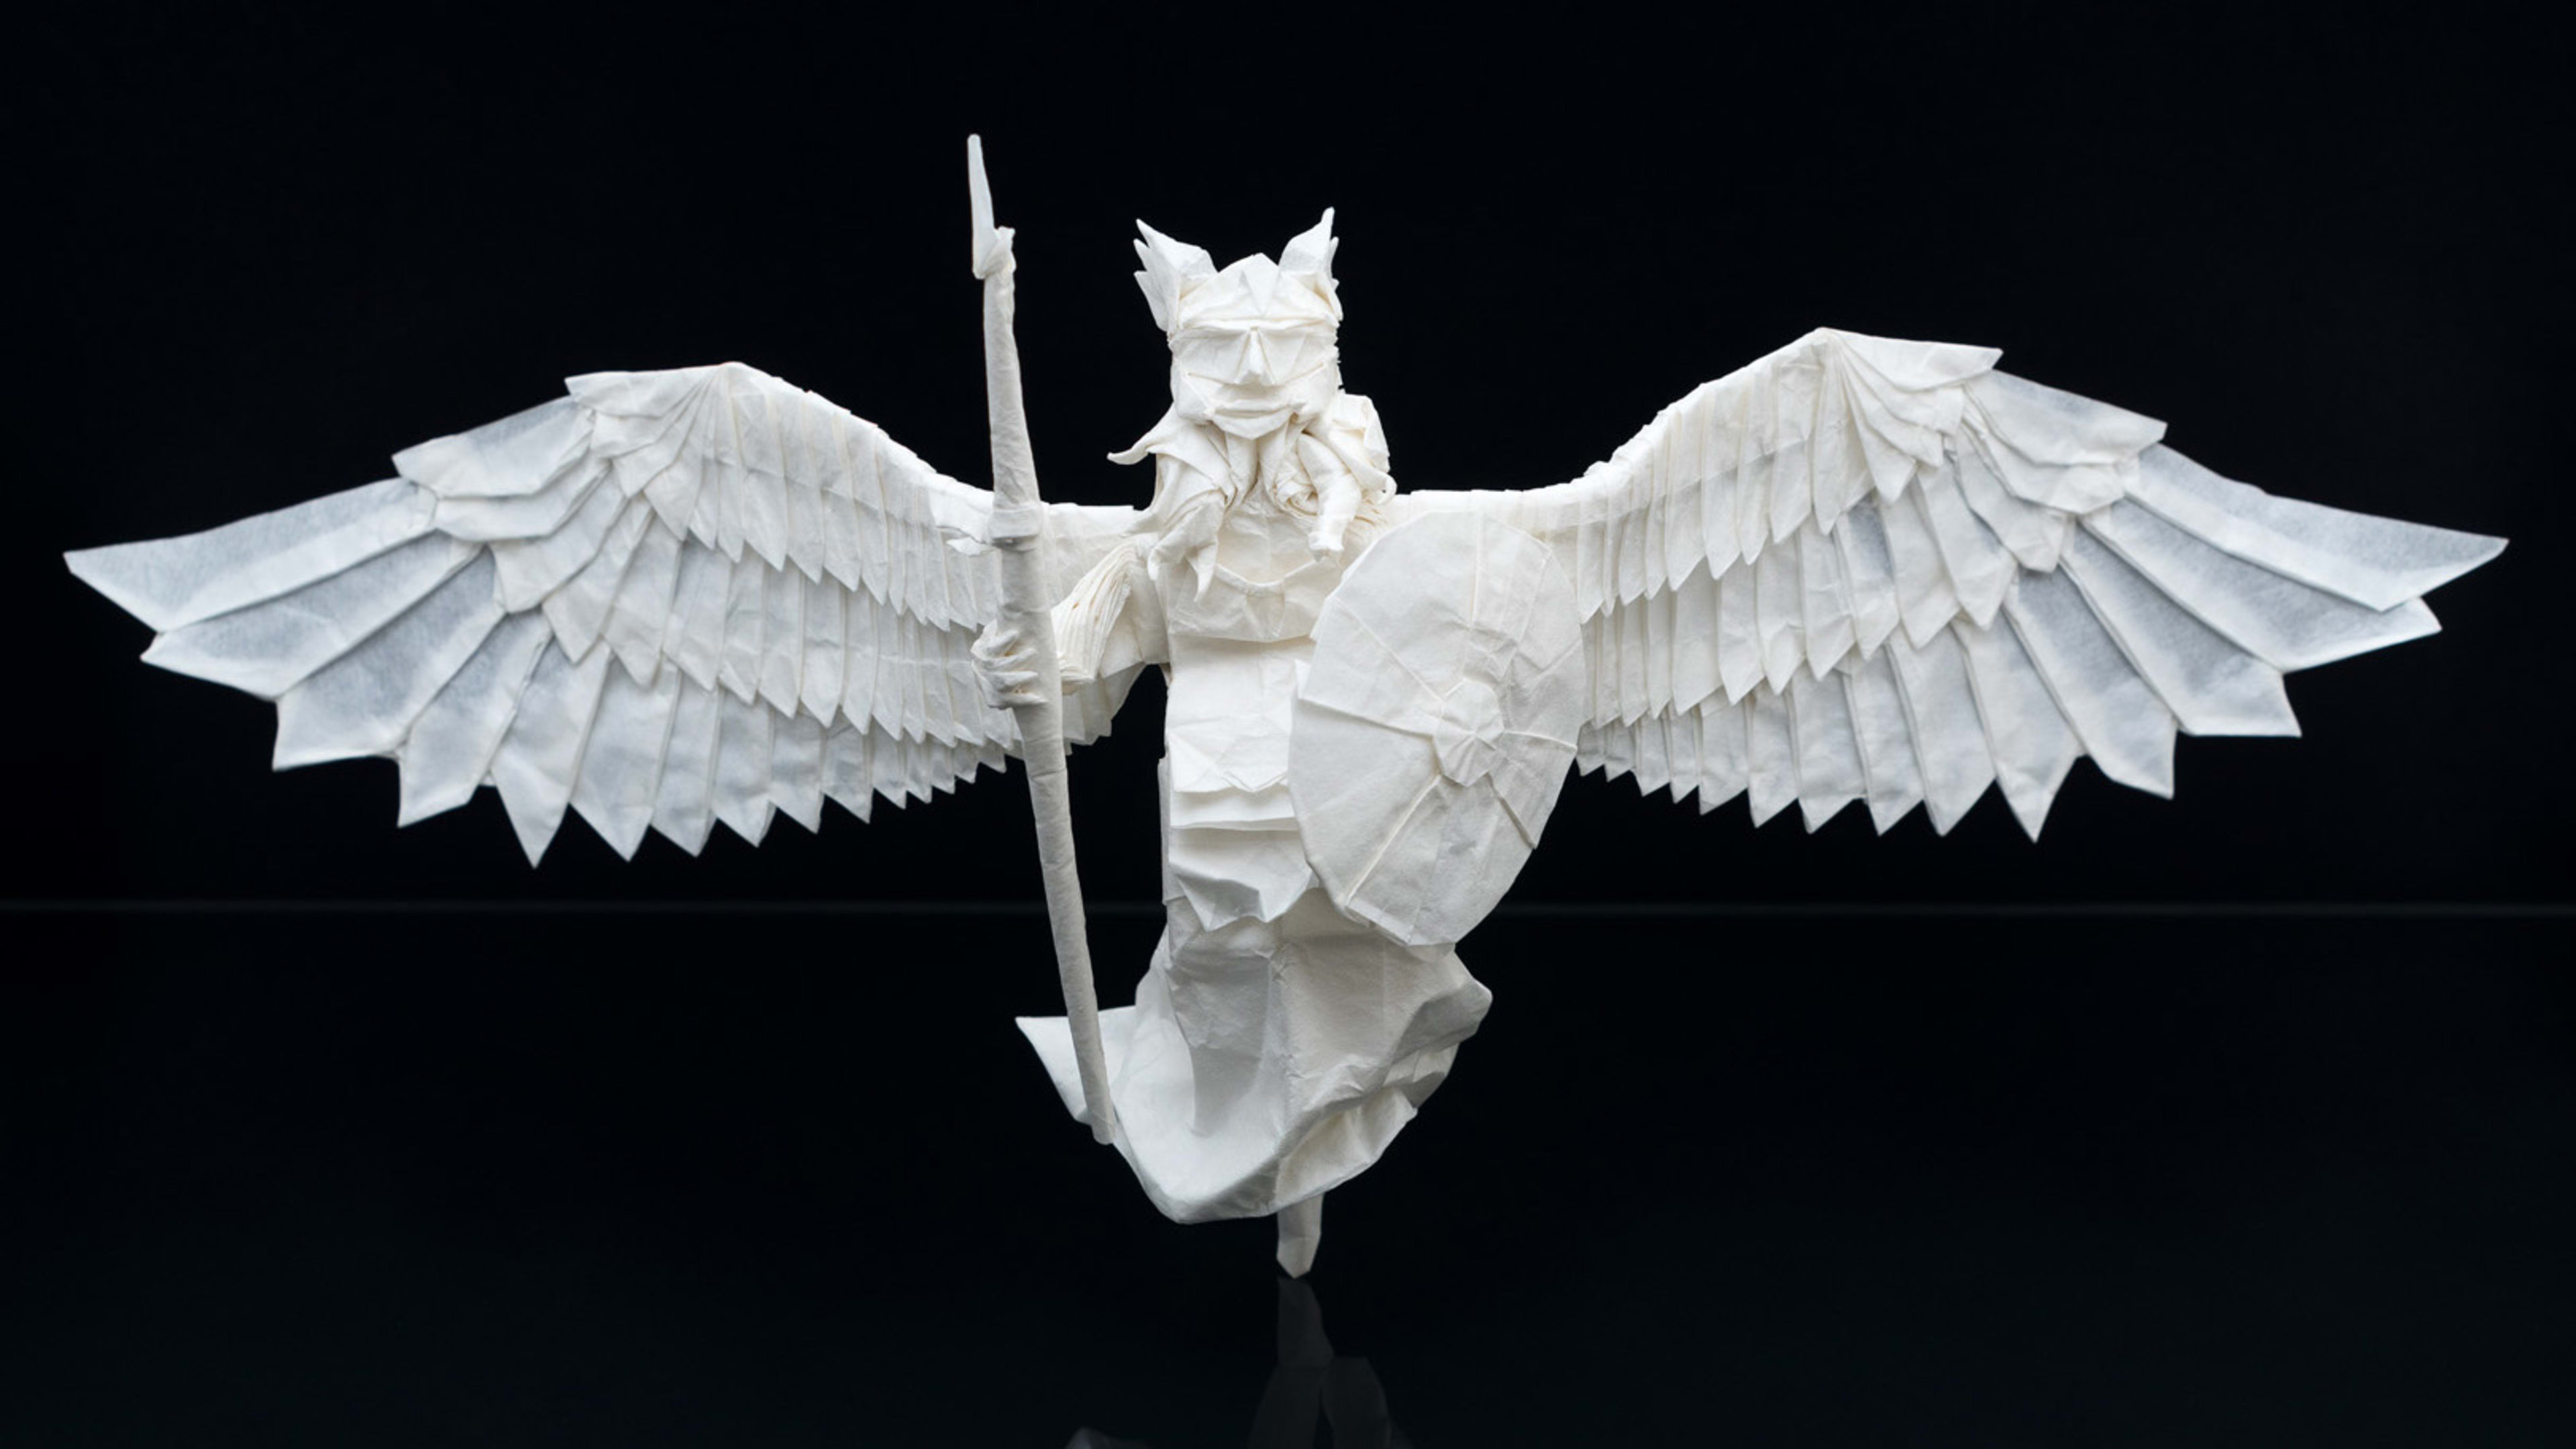 These impossibly detailed origami figures are made of a single piece of paper